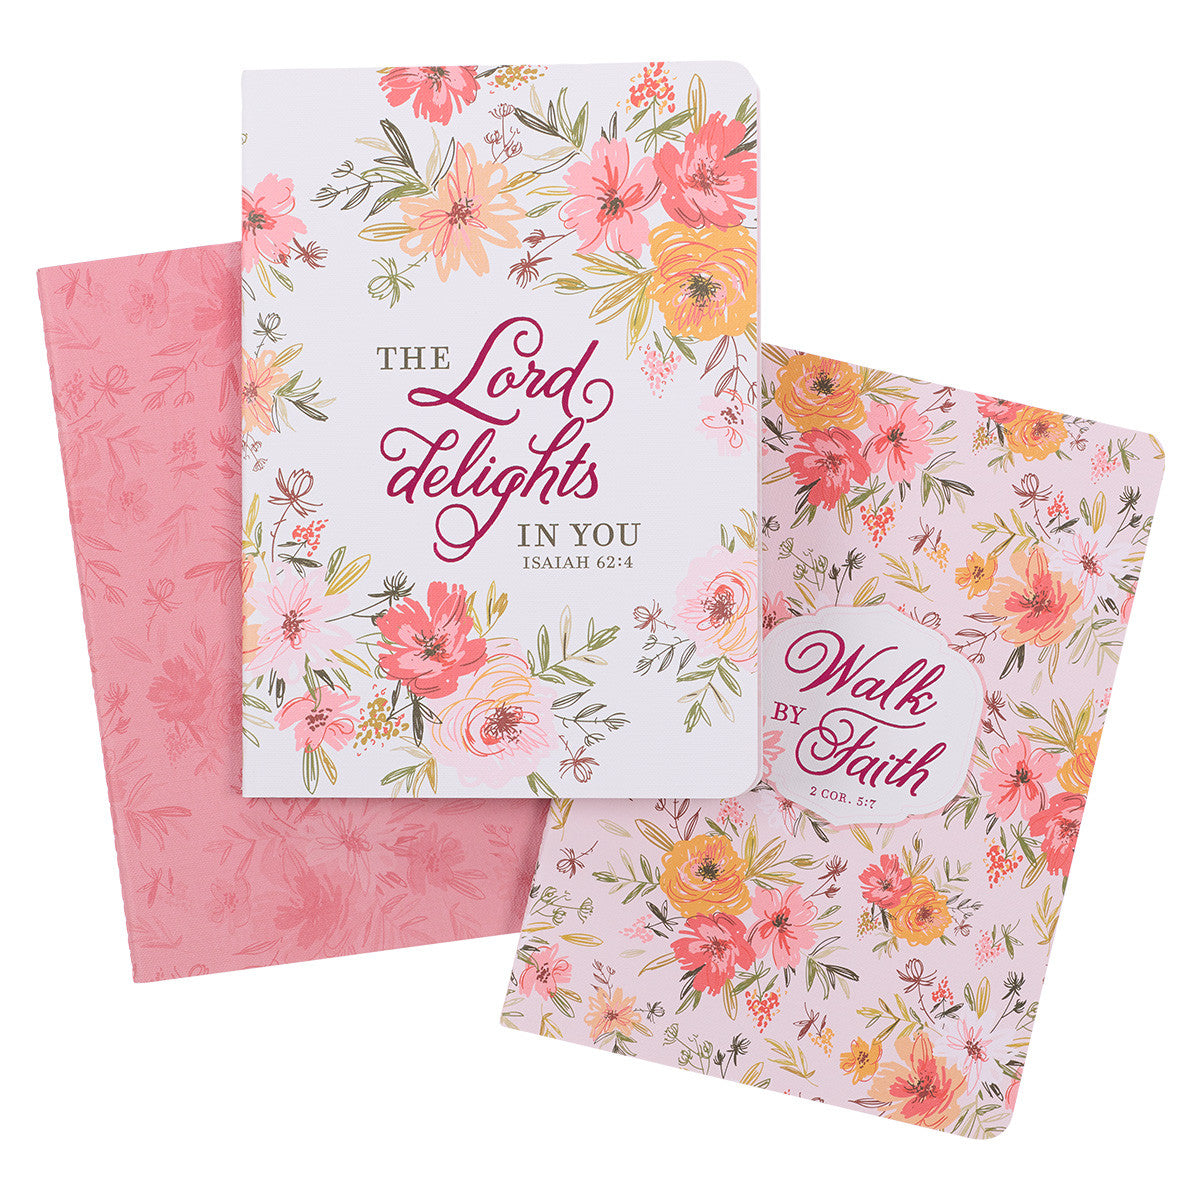 Walk by Faith Berry Pink Floral Large Notebook Set - 2 Corinthians 5:7 - The Christian Gift Company